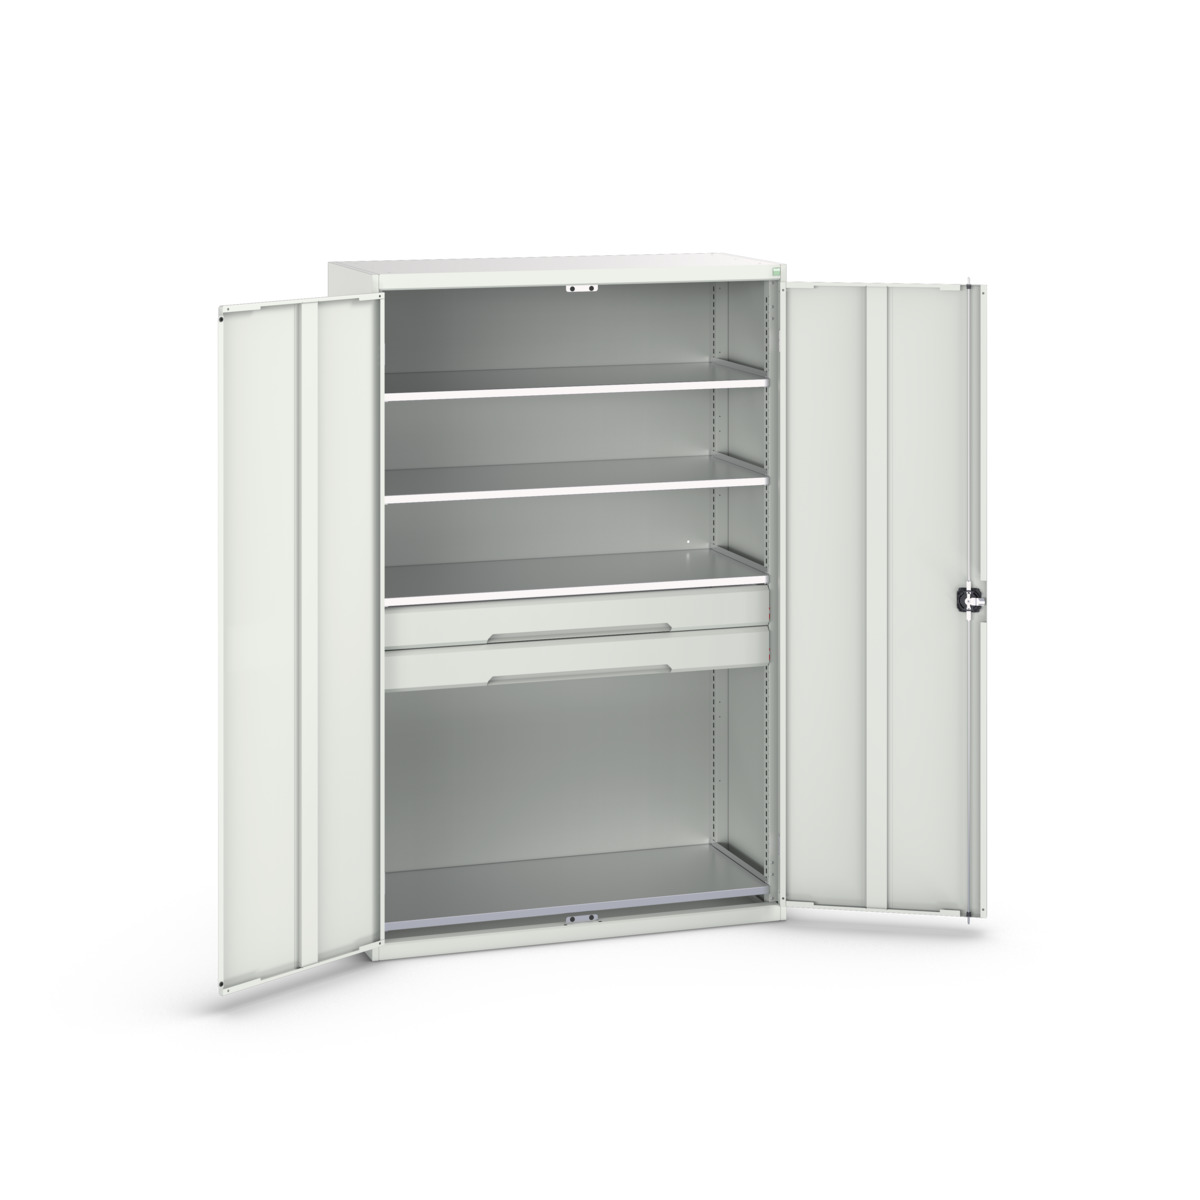 16926654.16 - verso kitted cupboard